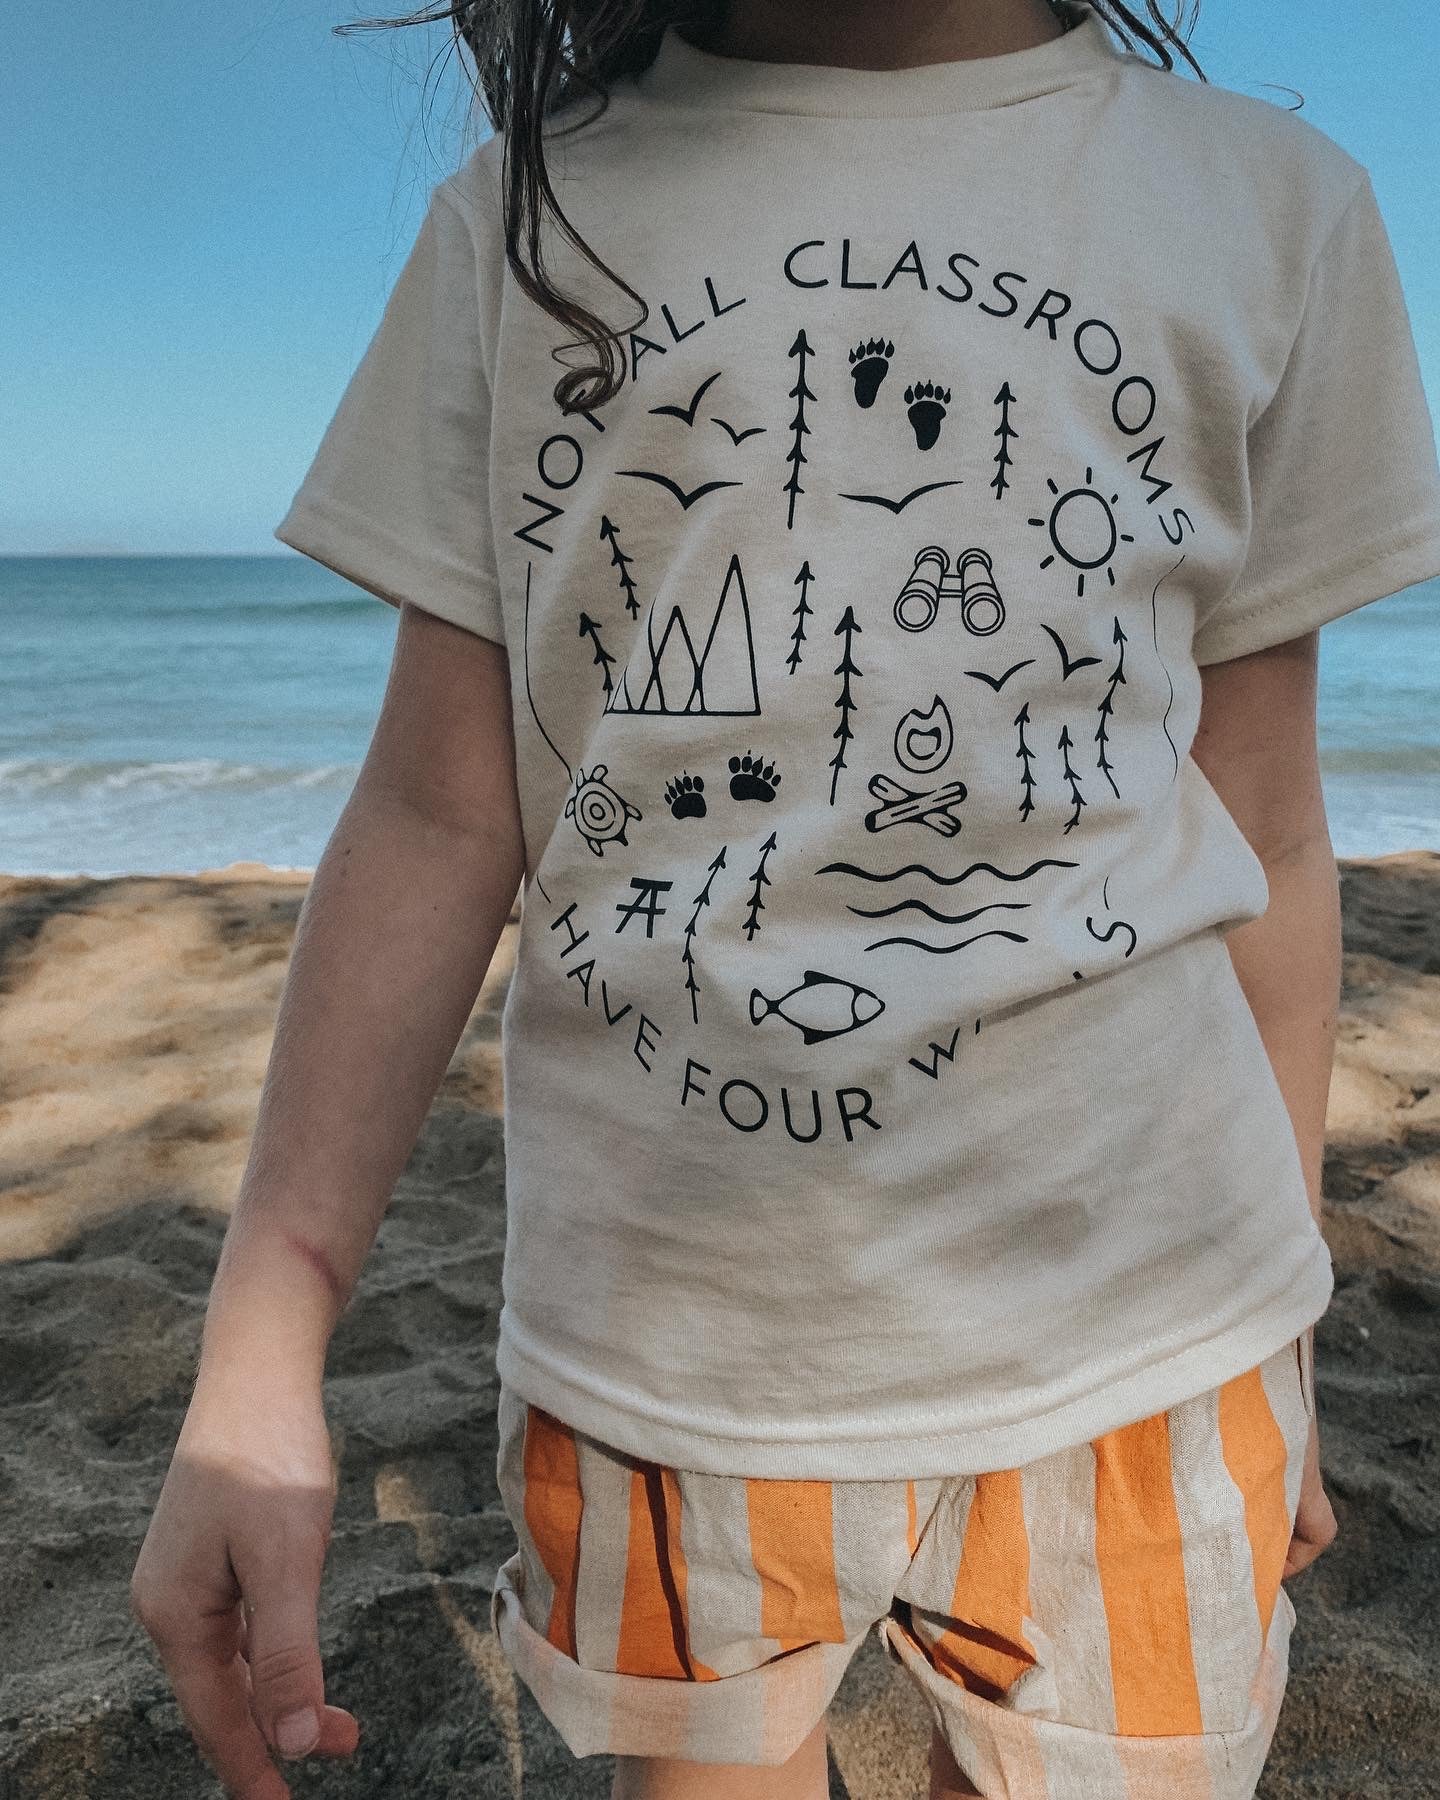 Not All Classrooms Have Four Wall Shirt